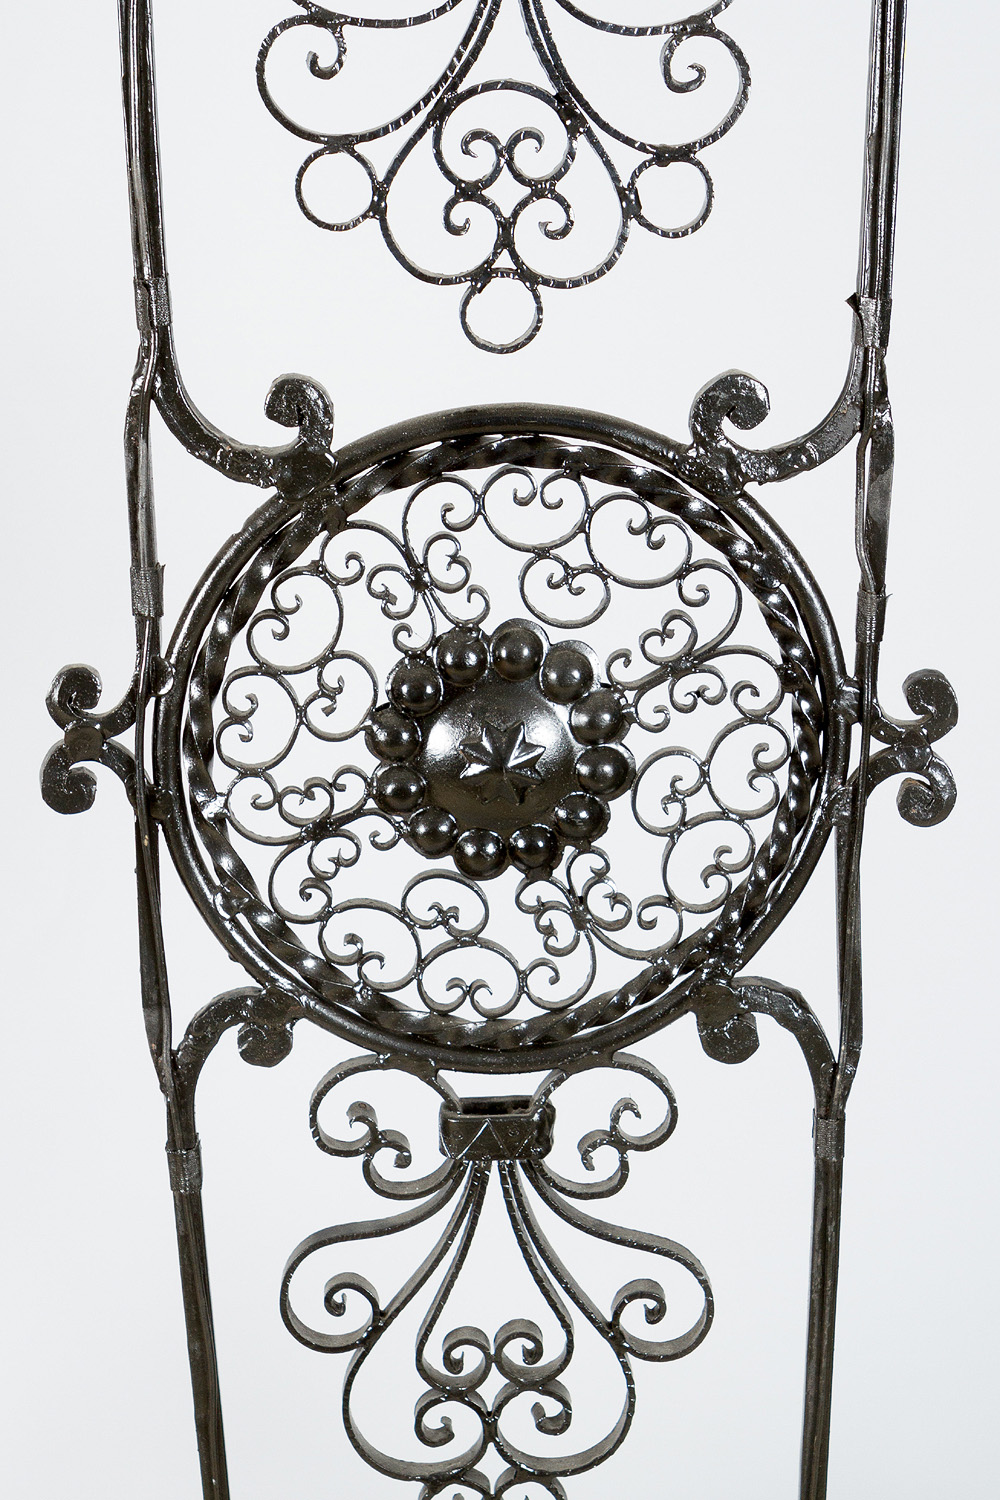 Pair of rough iron chandeliers - Image 2 of 3